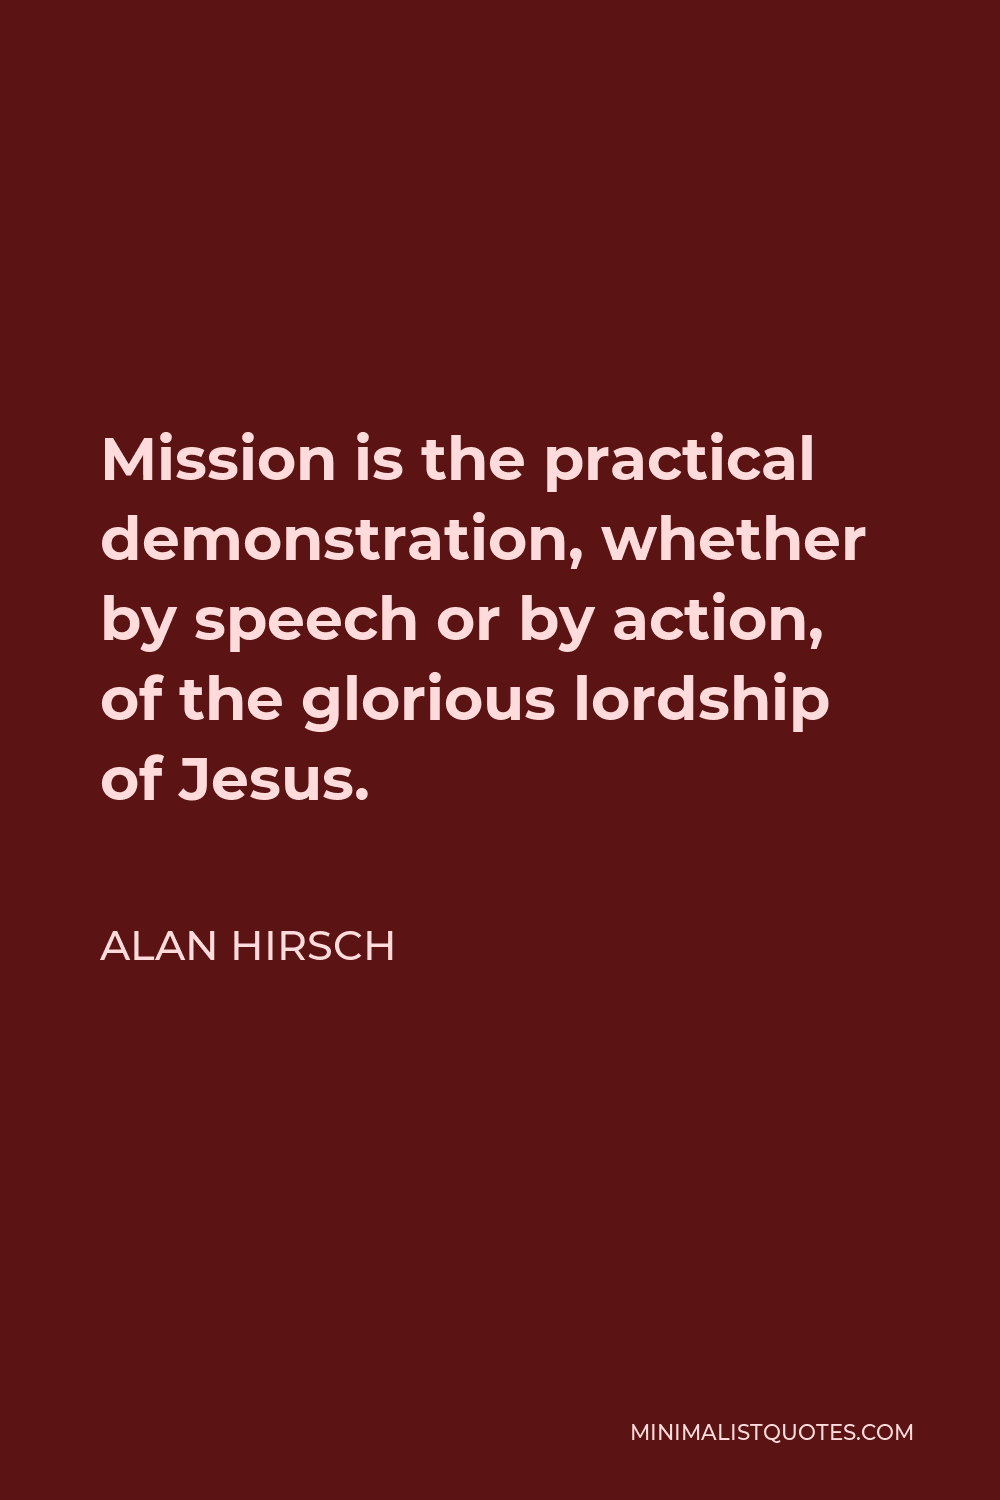 Alan Hirsch Quote - Mission is the practical demonstration, whether by speech or by action, of the glorious lordship of Jesus.